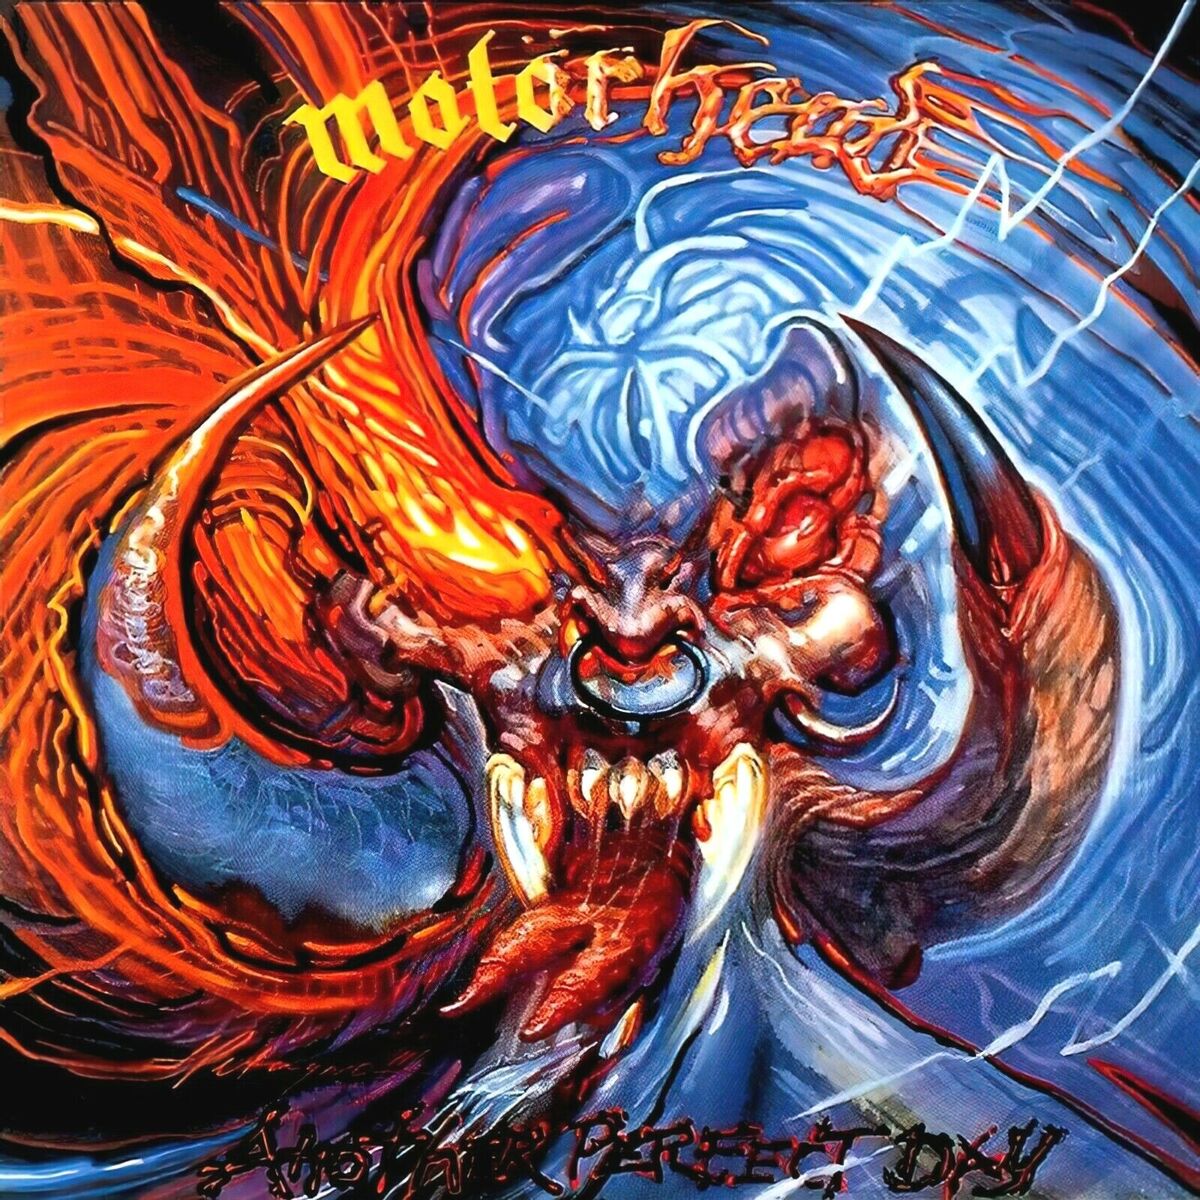 Металл BMG Motorhead - Another Perfect Day (Half Speed) (Coloured Vinyl LP) tempest another dawn 1 cd